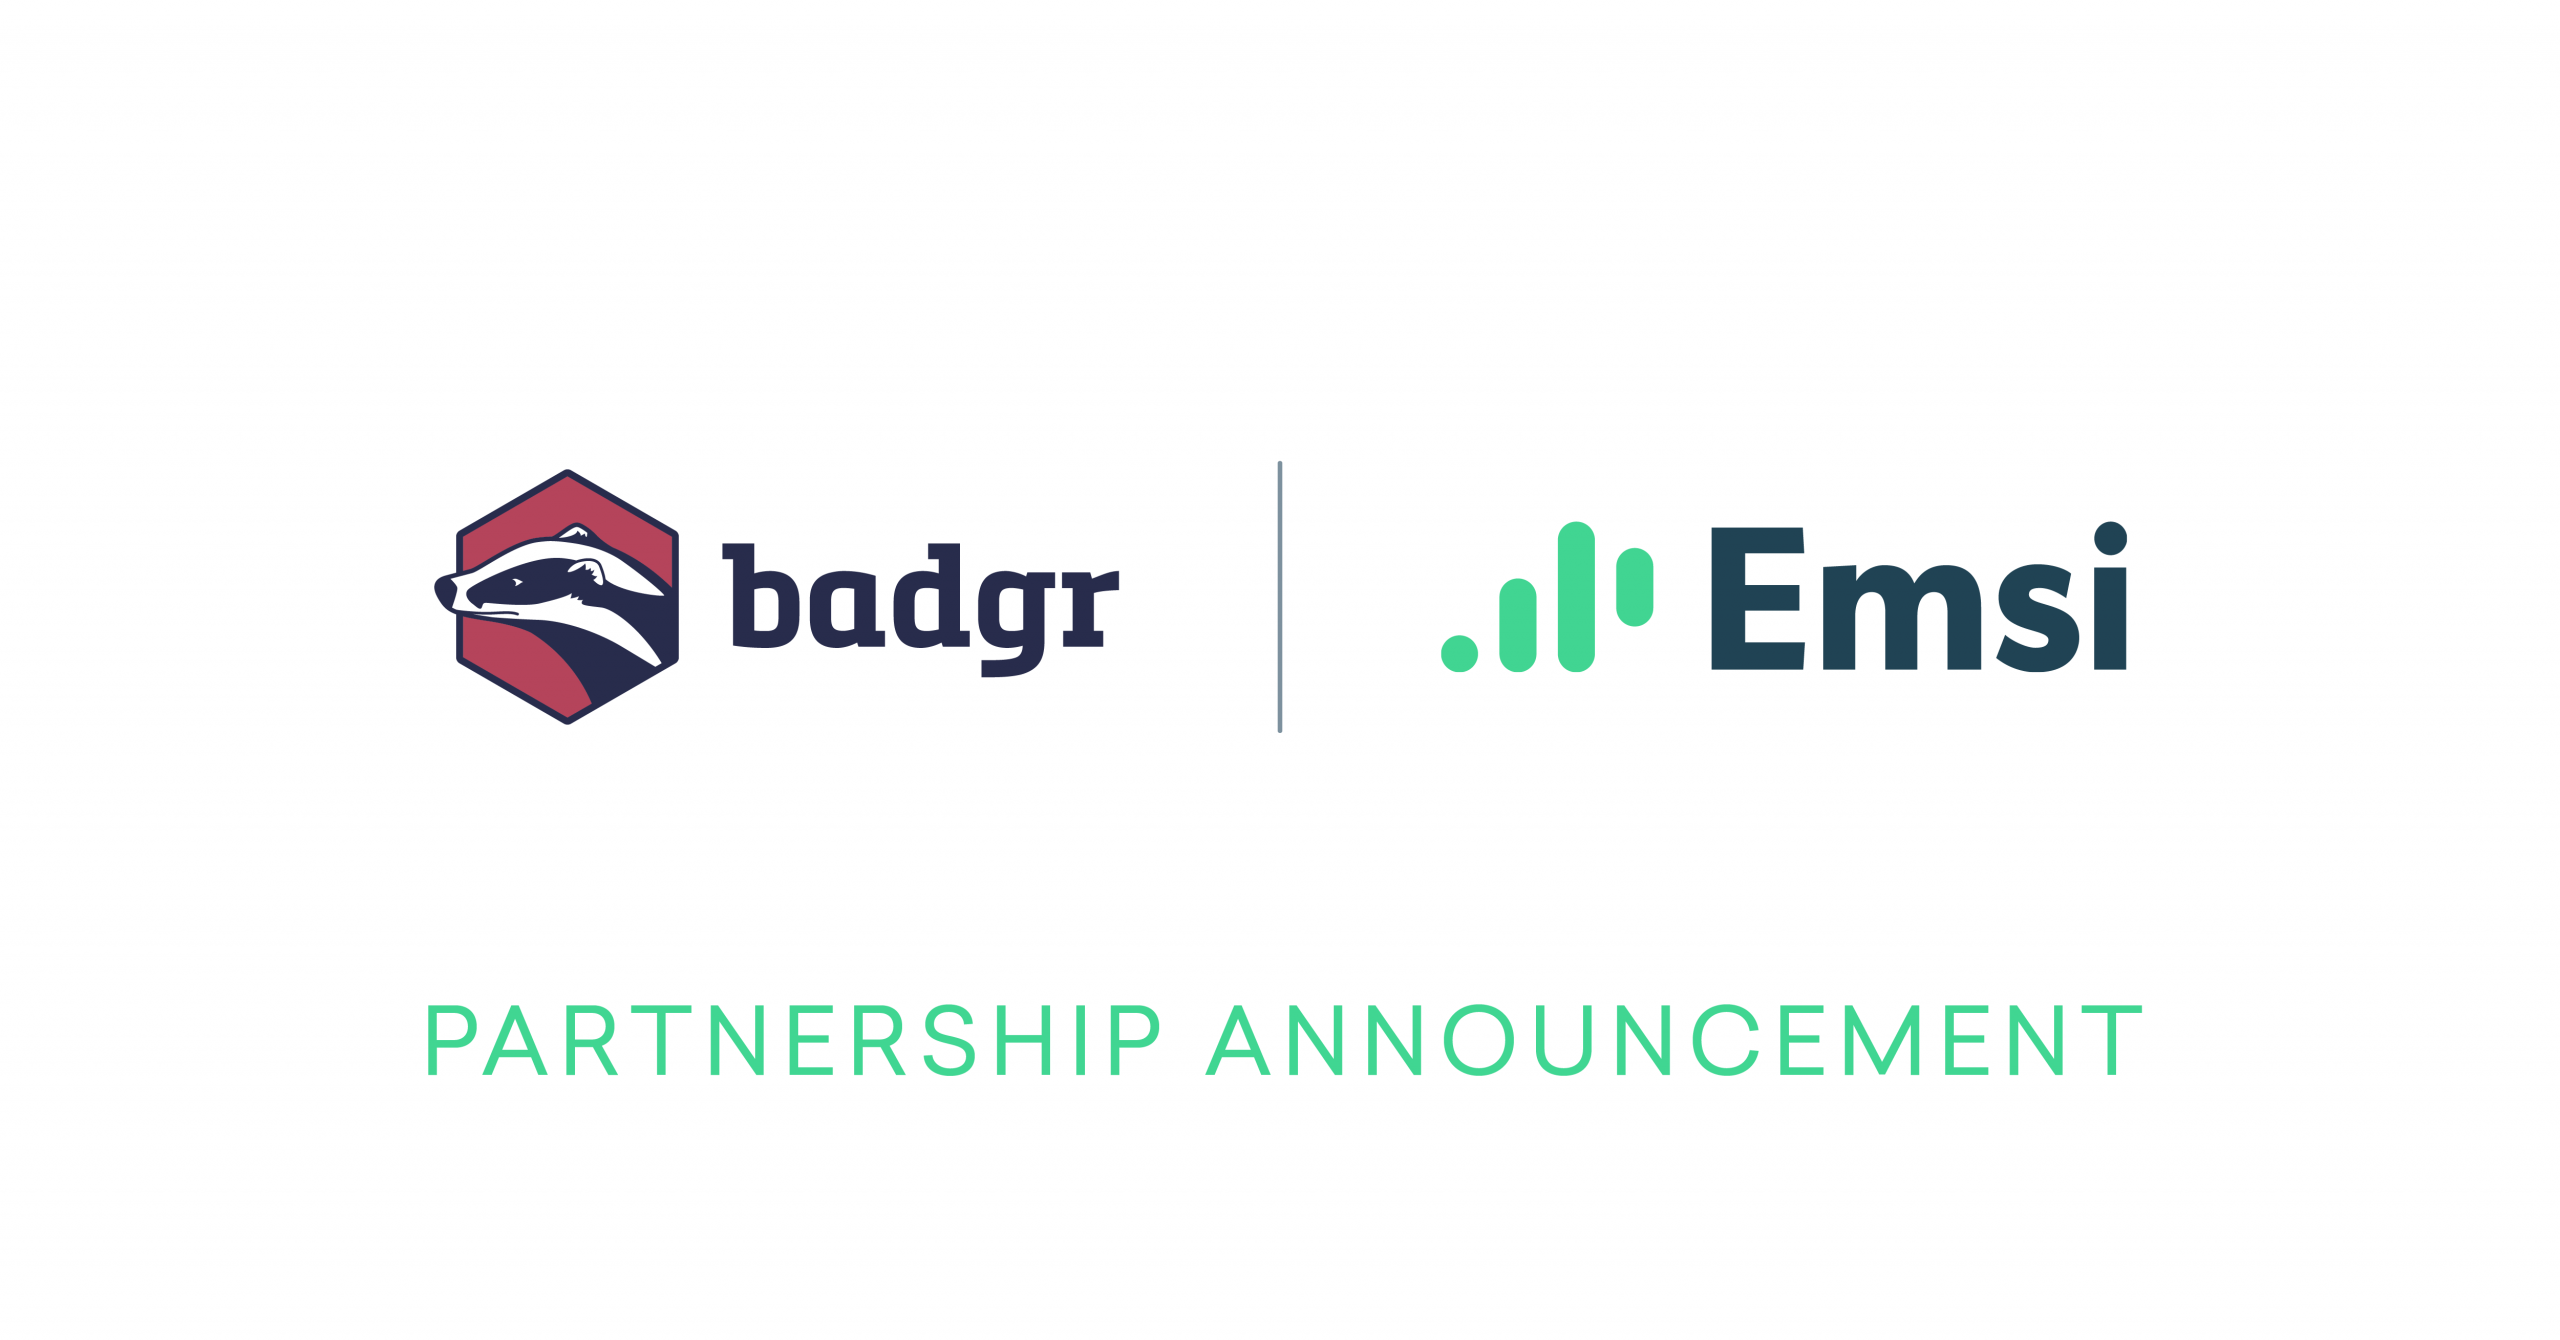 Badgr and Emsi Partner to Enable Skill-Based Microcredentials